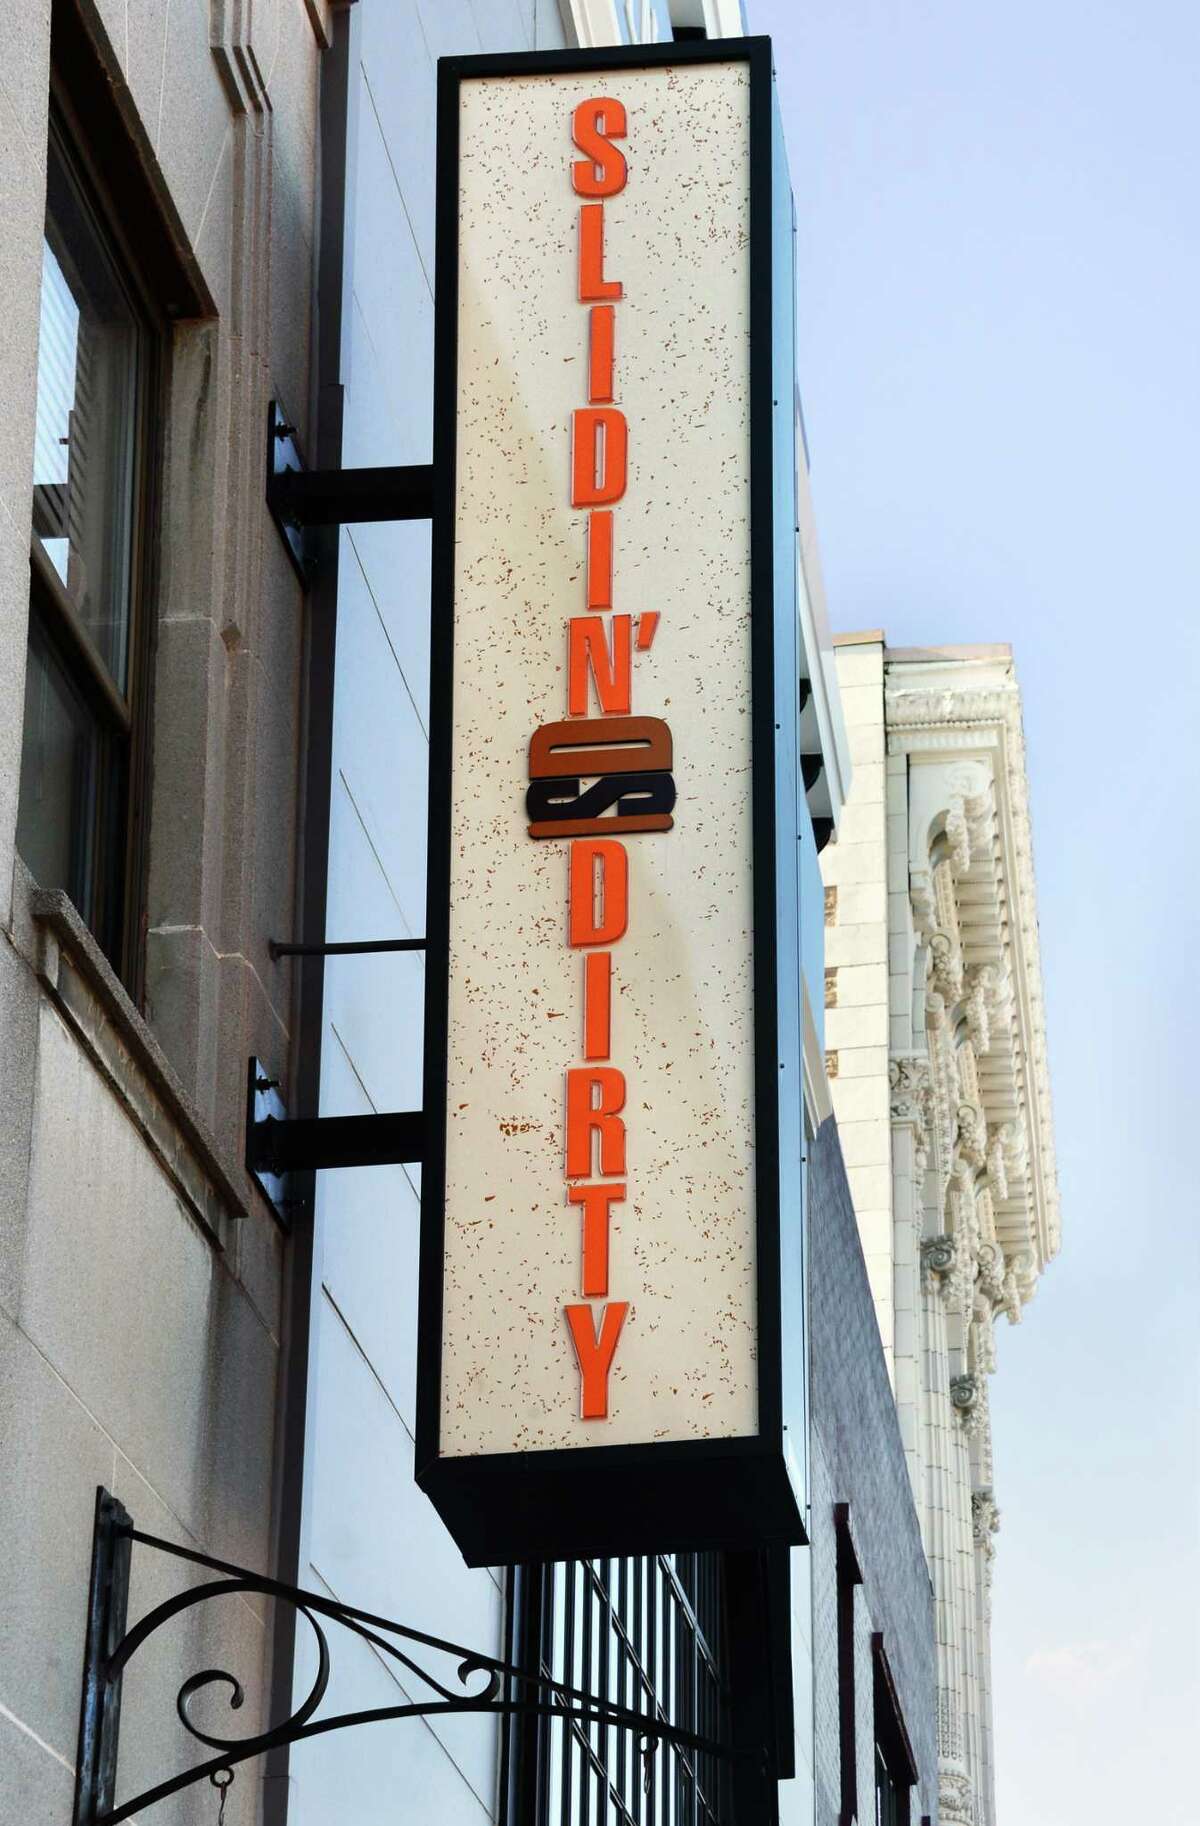 Sign above Slidin' Dirty restaurant on State Street Wednesday Feb. 14, 2018 in Schenectady, NY. (John Carl D'Annibale/Times Union)